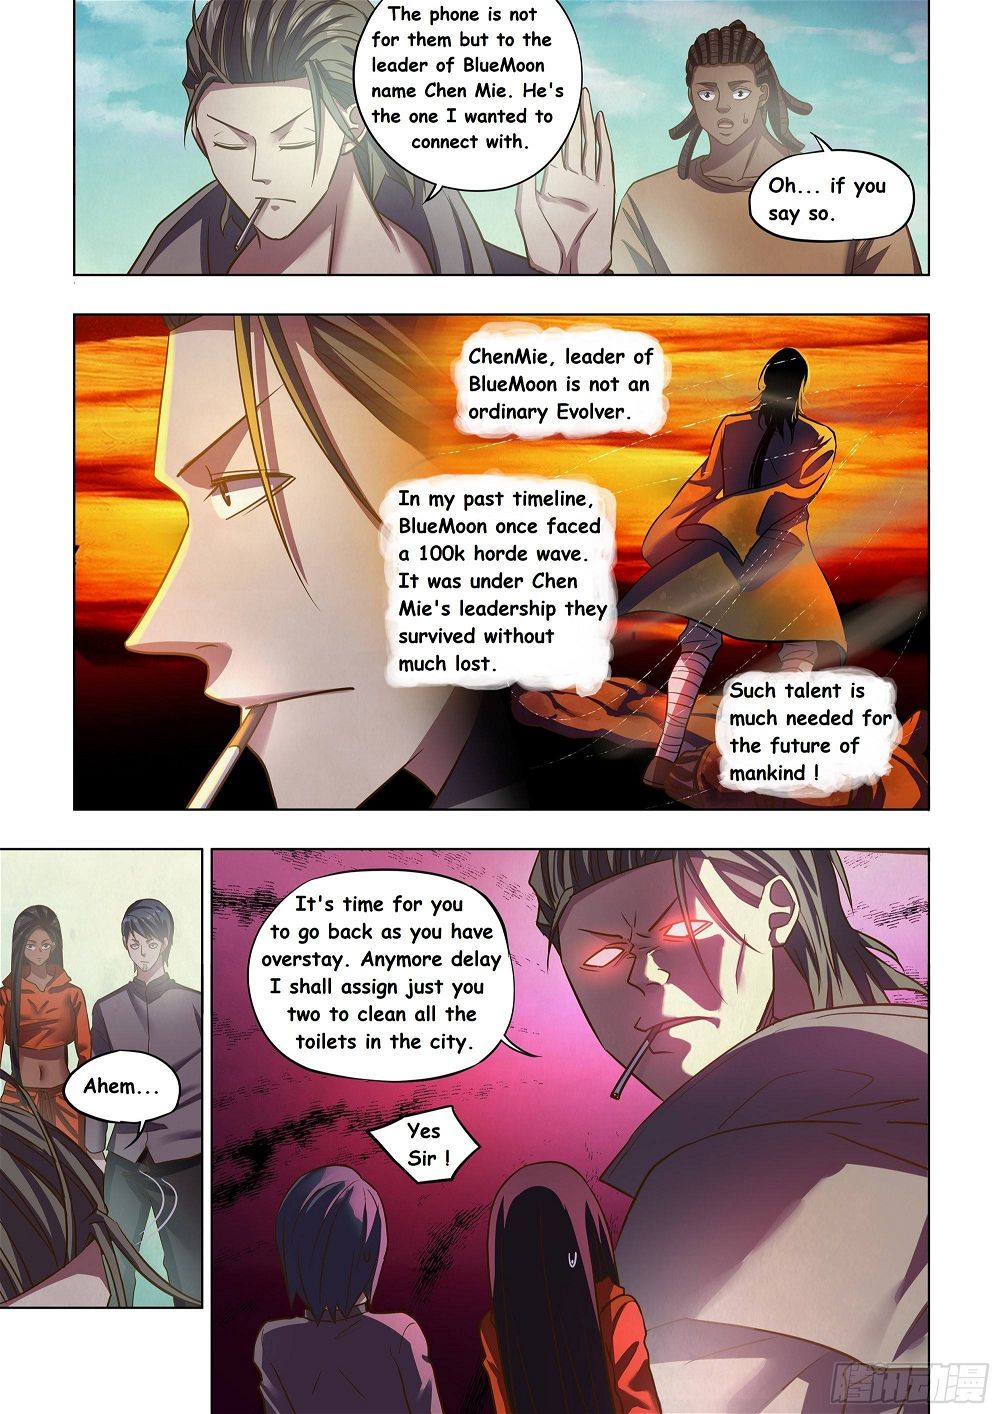 The Last Human Chapter 467 - Page 11